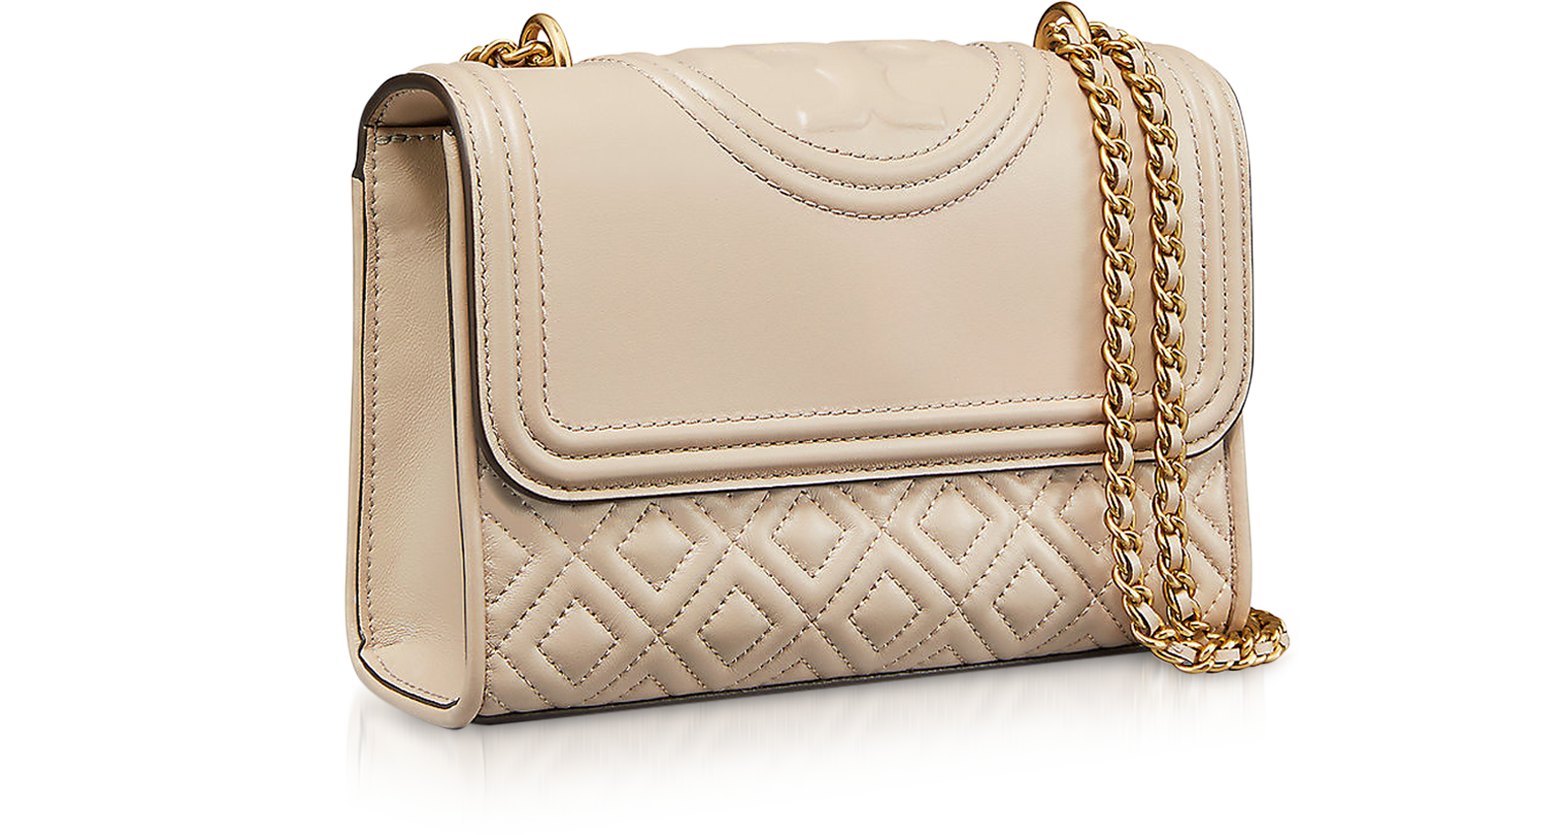 Tory Burch Fleming Small Convertible Shoulder Bag - Light Taupe